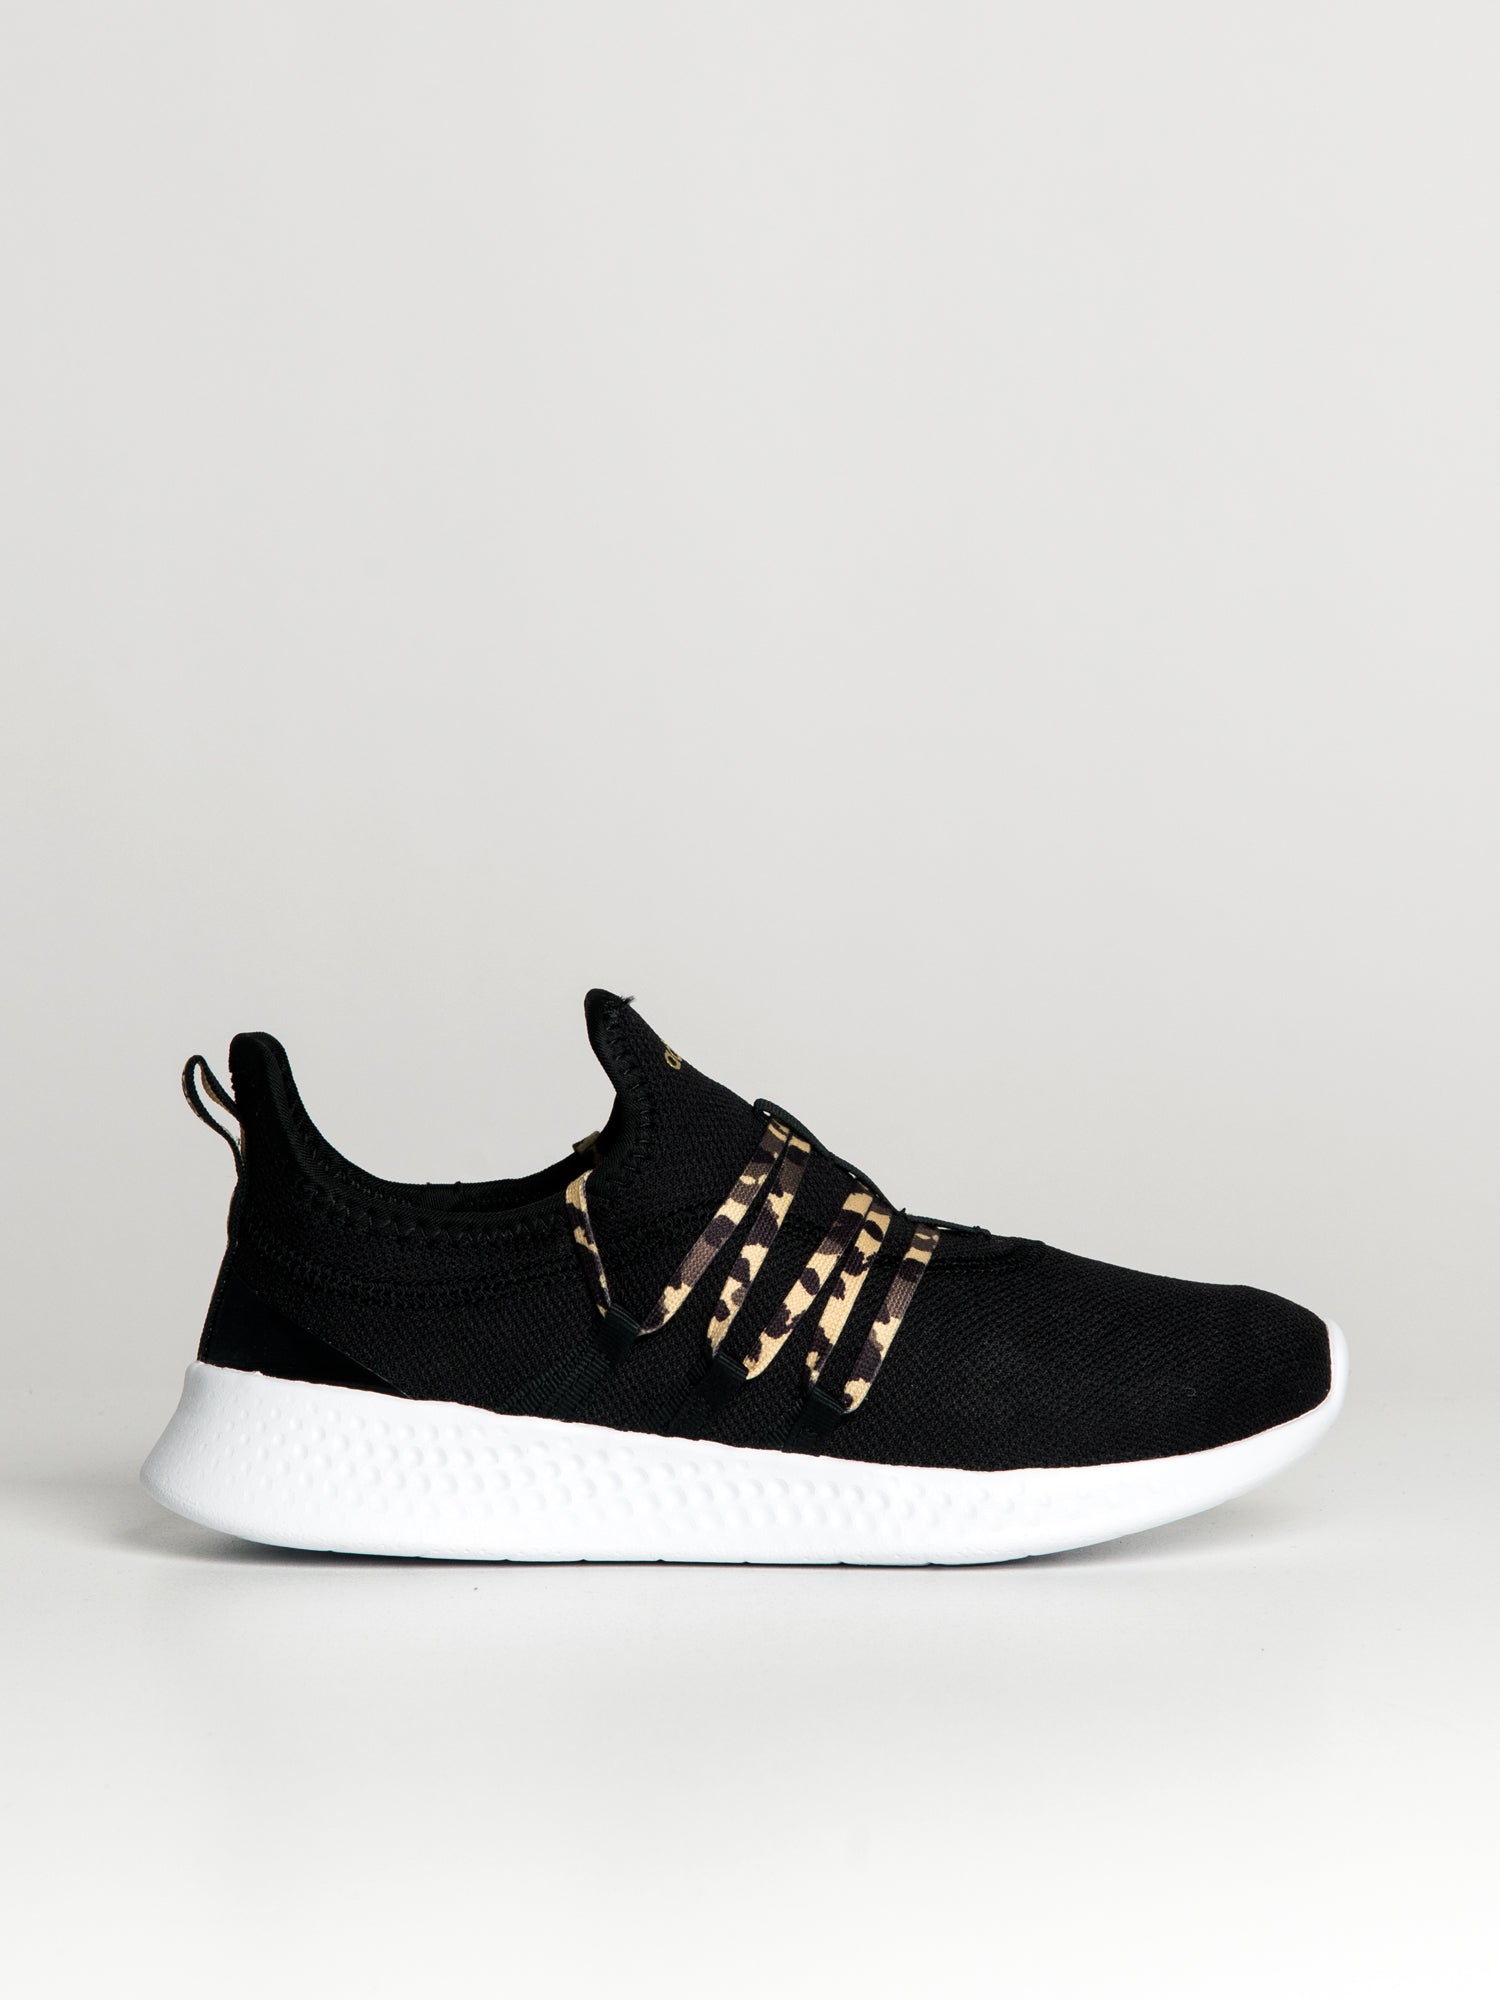 WOMENS ADIDAS PUREMOTION ADAPT 2.0 SNEAKER - CLEARANCE